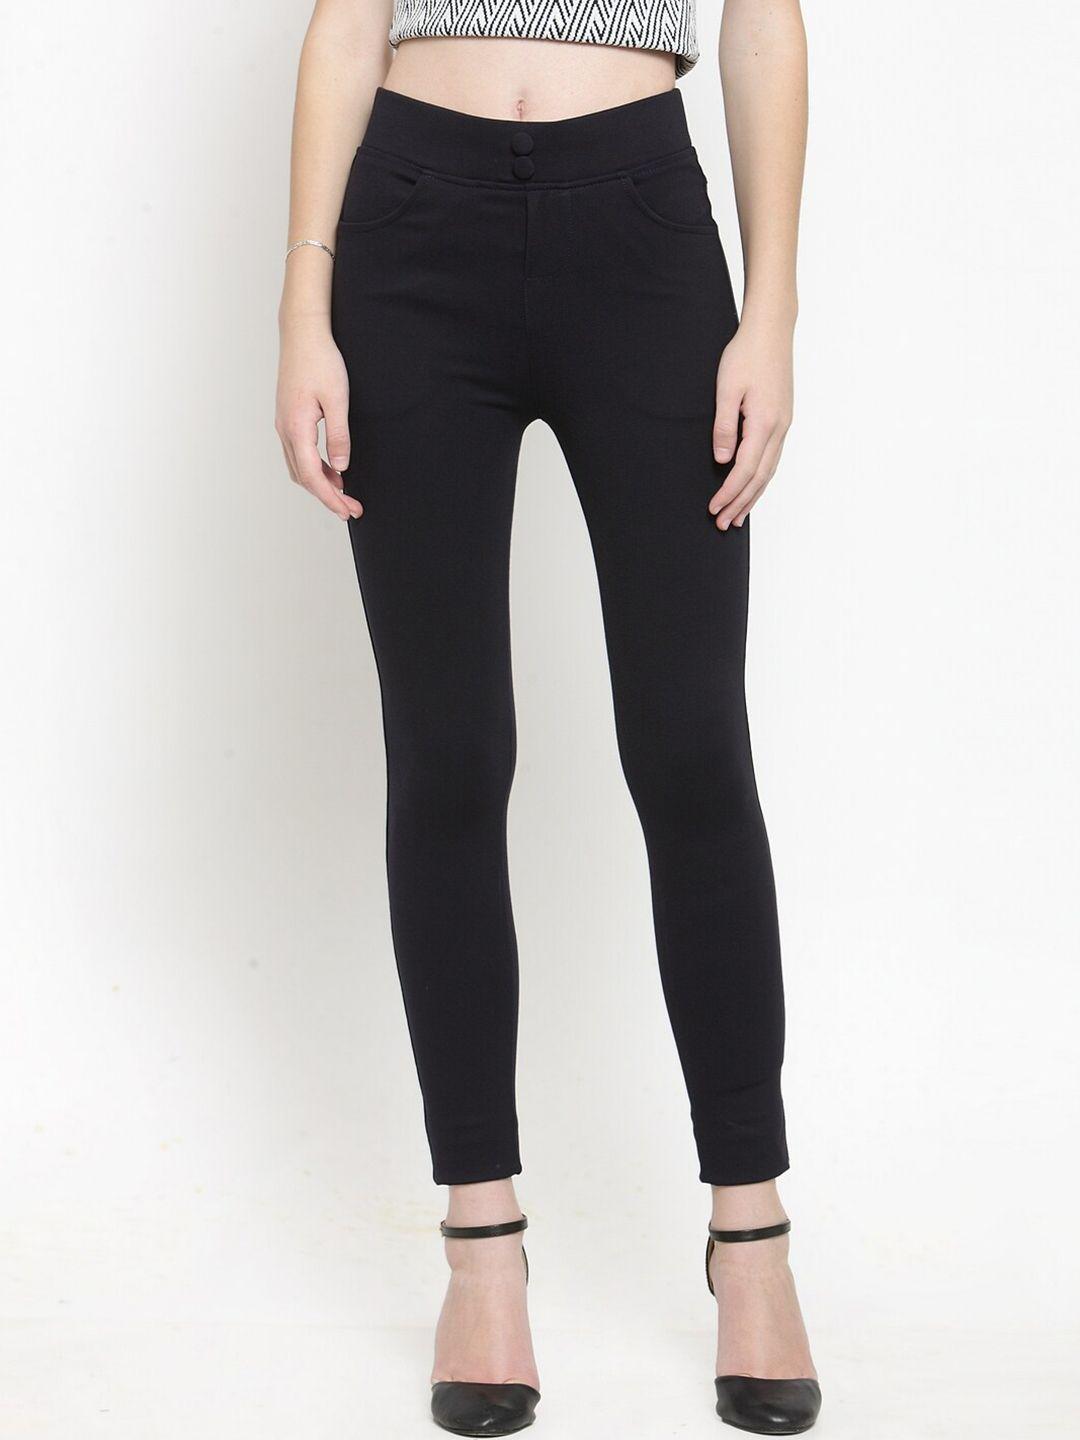 clora-creation-women-navy-blue-solid-skinny-fit-jeggings